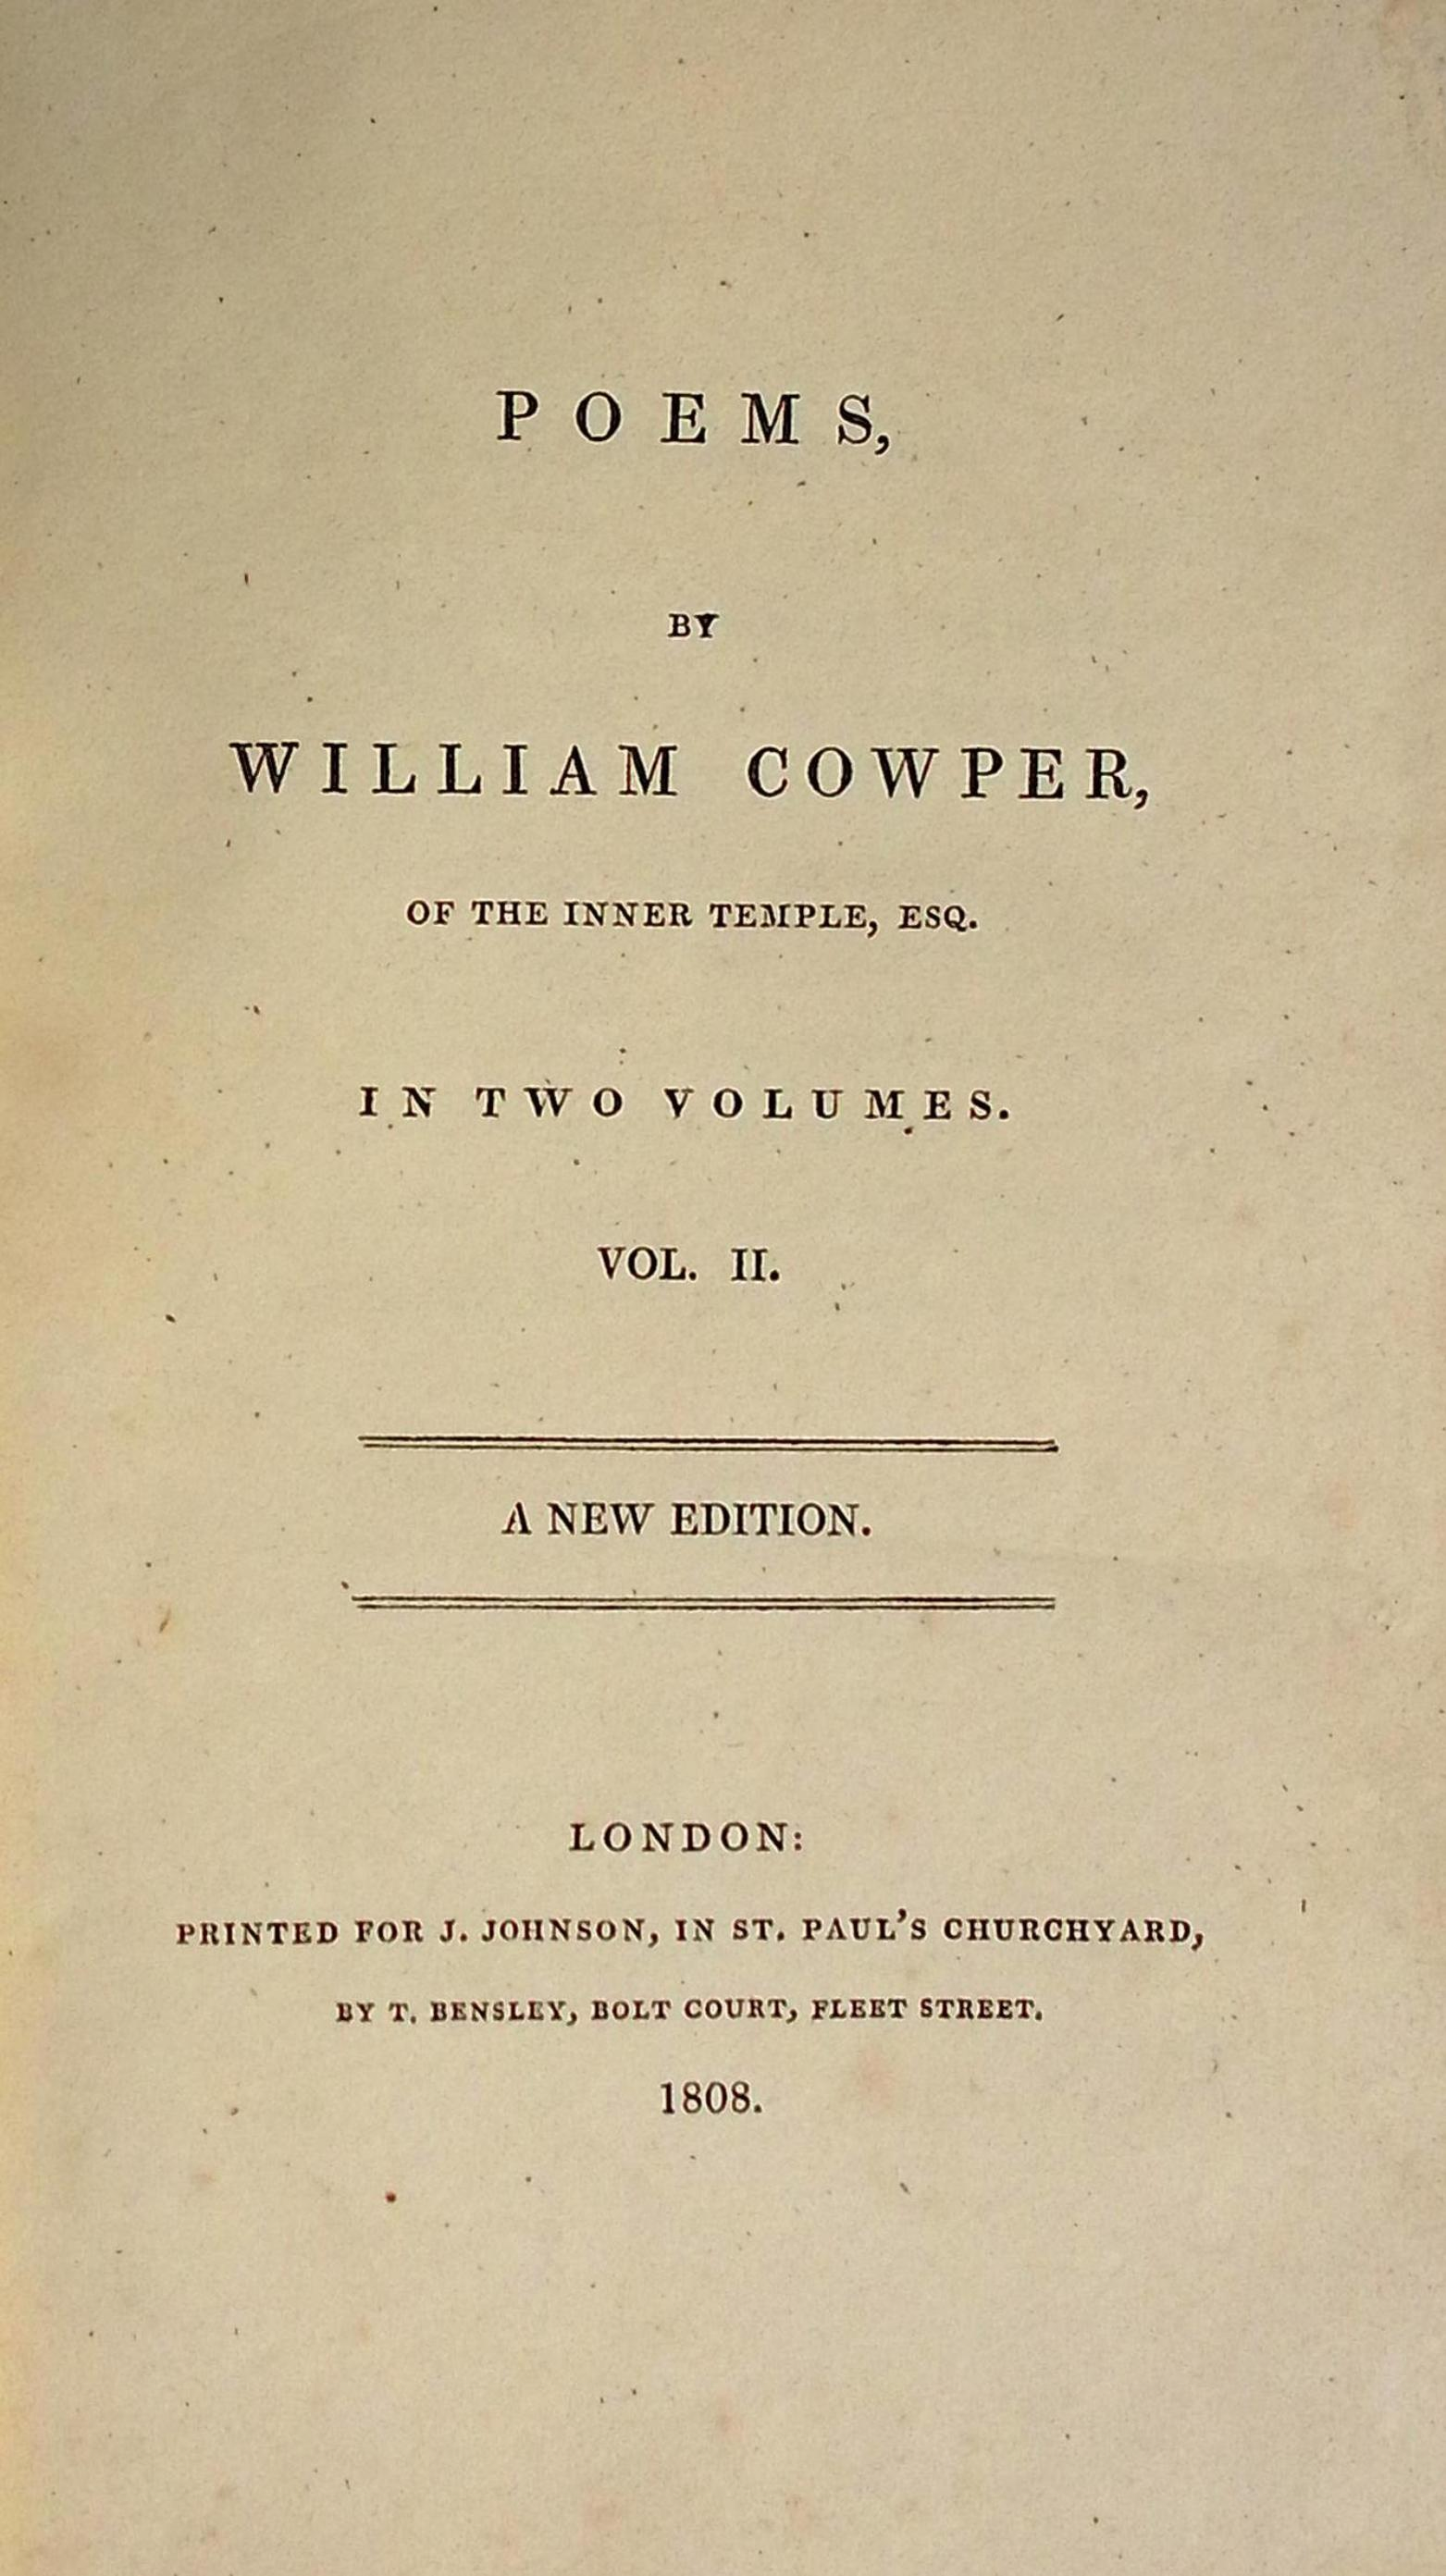 Poems by William Cowper of the Inner Temple, Esq. 2 volume set.